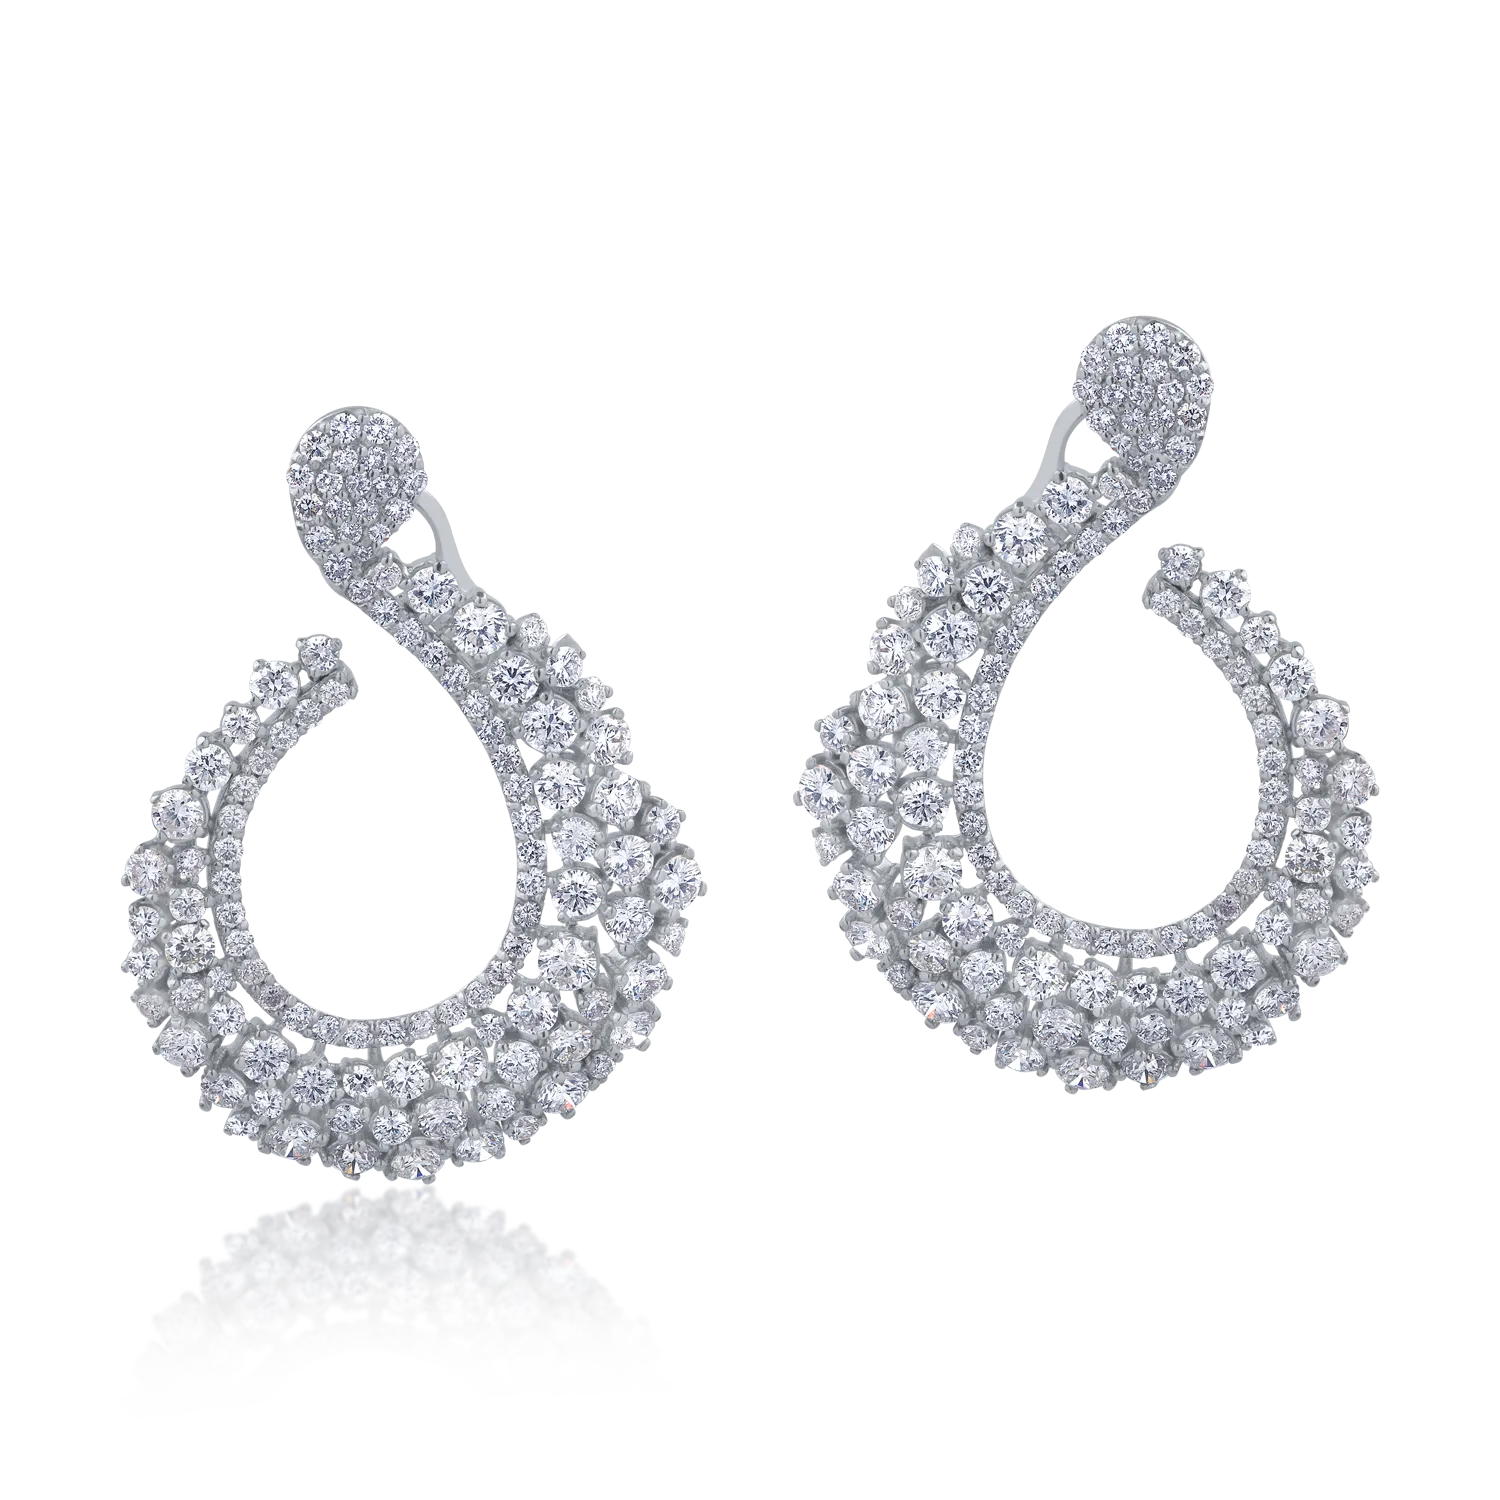 18K white gold earrings with 7.16ct diamonds